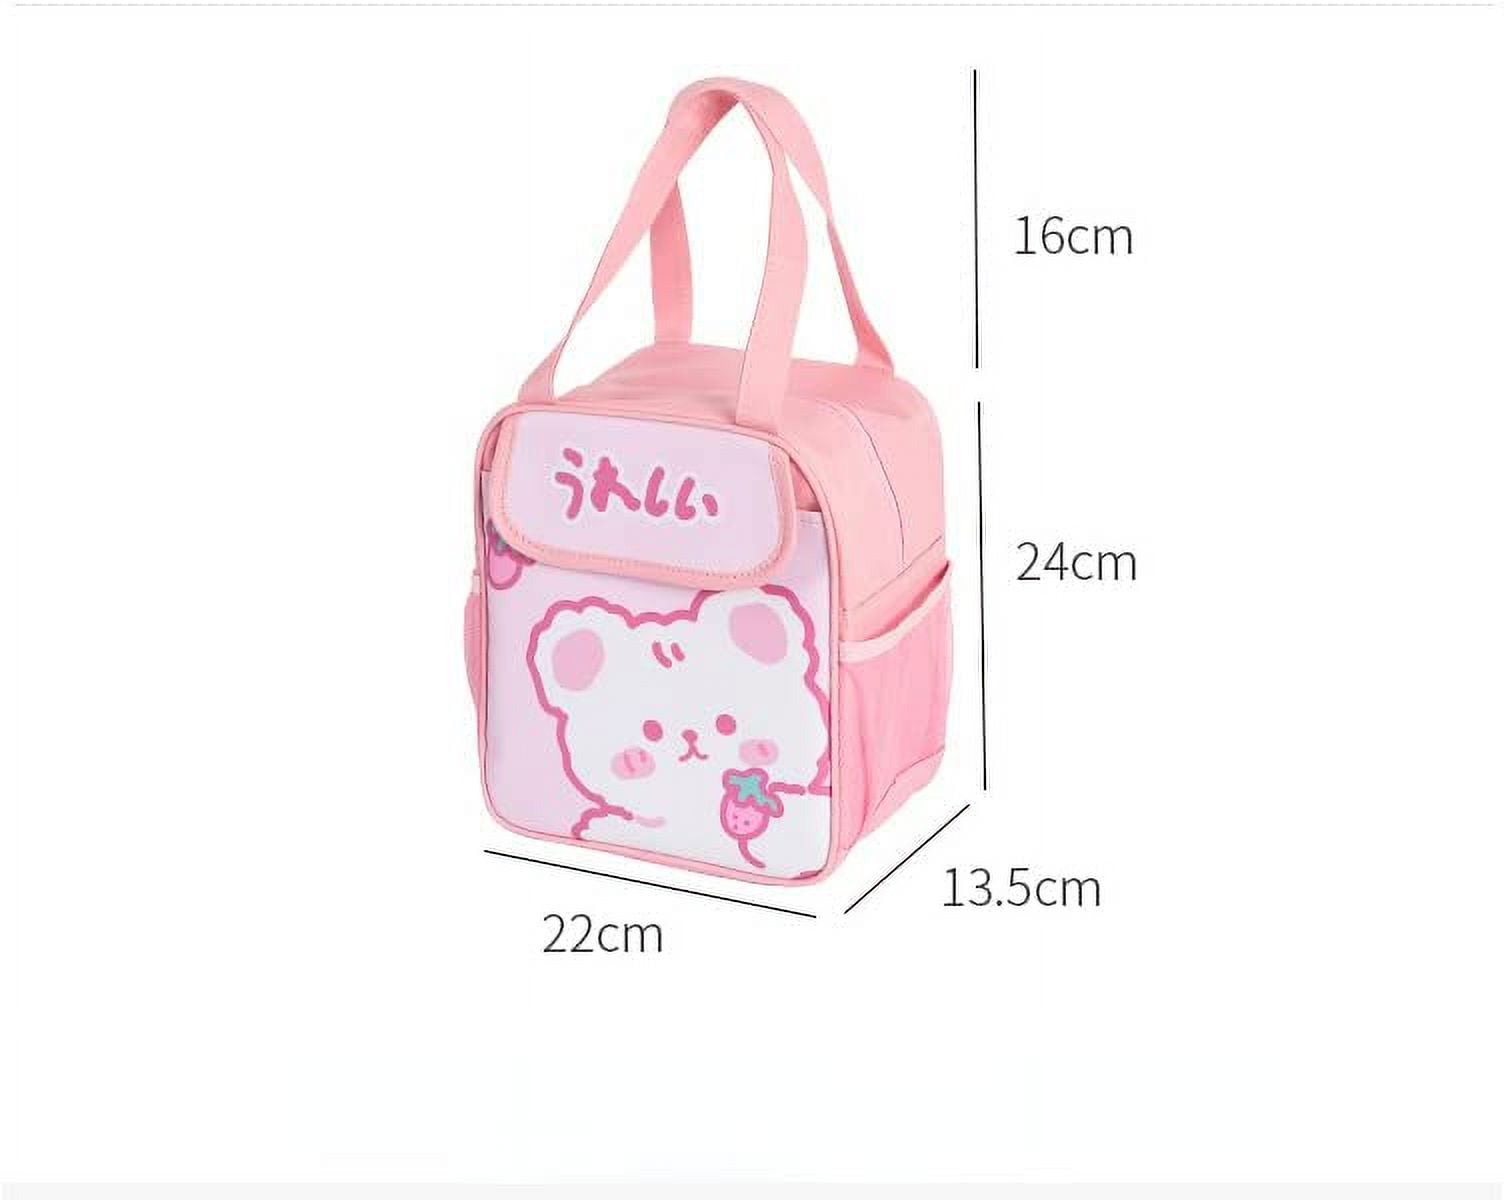 DanceeMangoos Kawaii Lunch Bag Cute Japanese Anime Lunch Box Aesthetic  Insulated Multi-Pockets Tote Bag for School Work Picnics Travel Accessories  (Beige) 